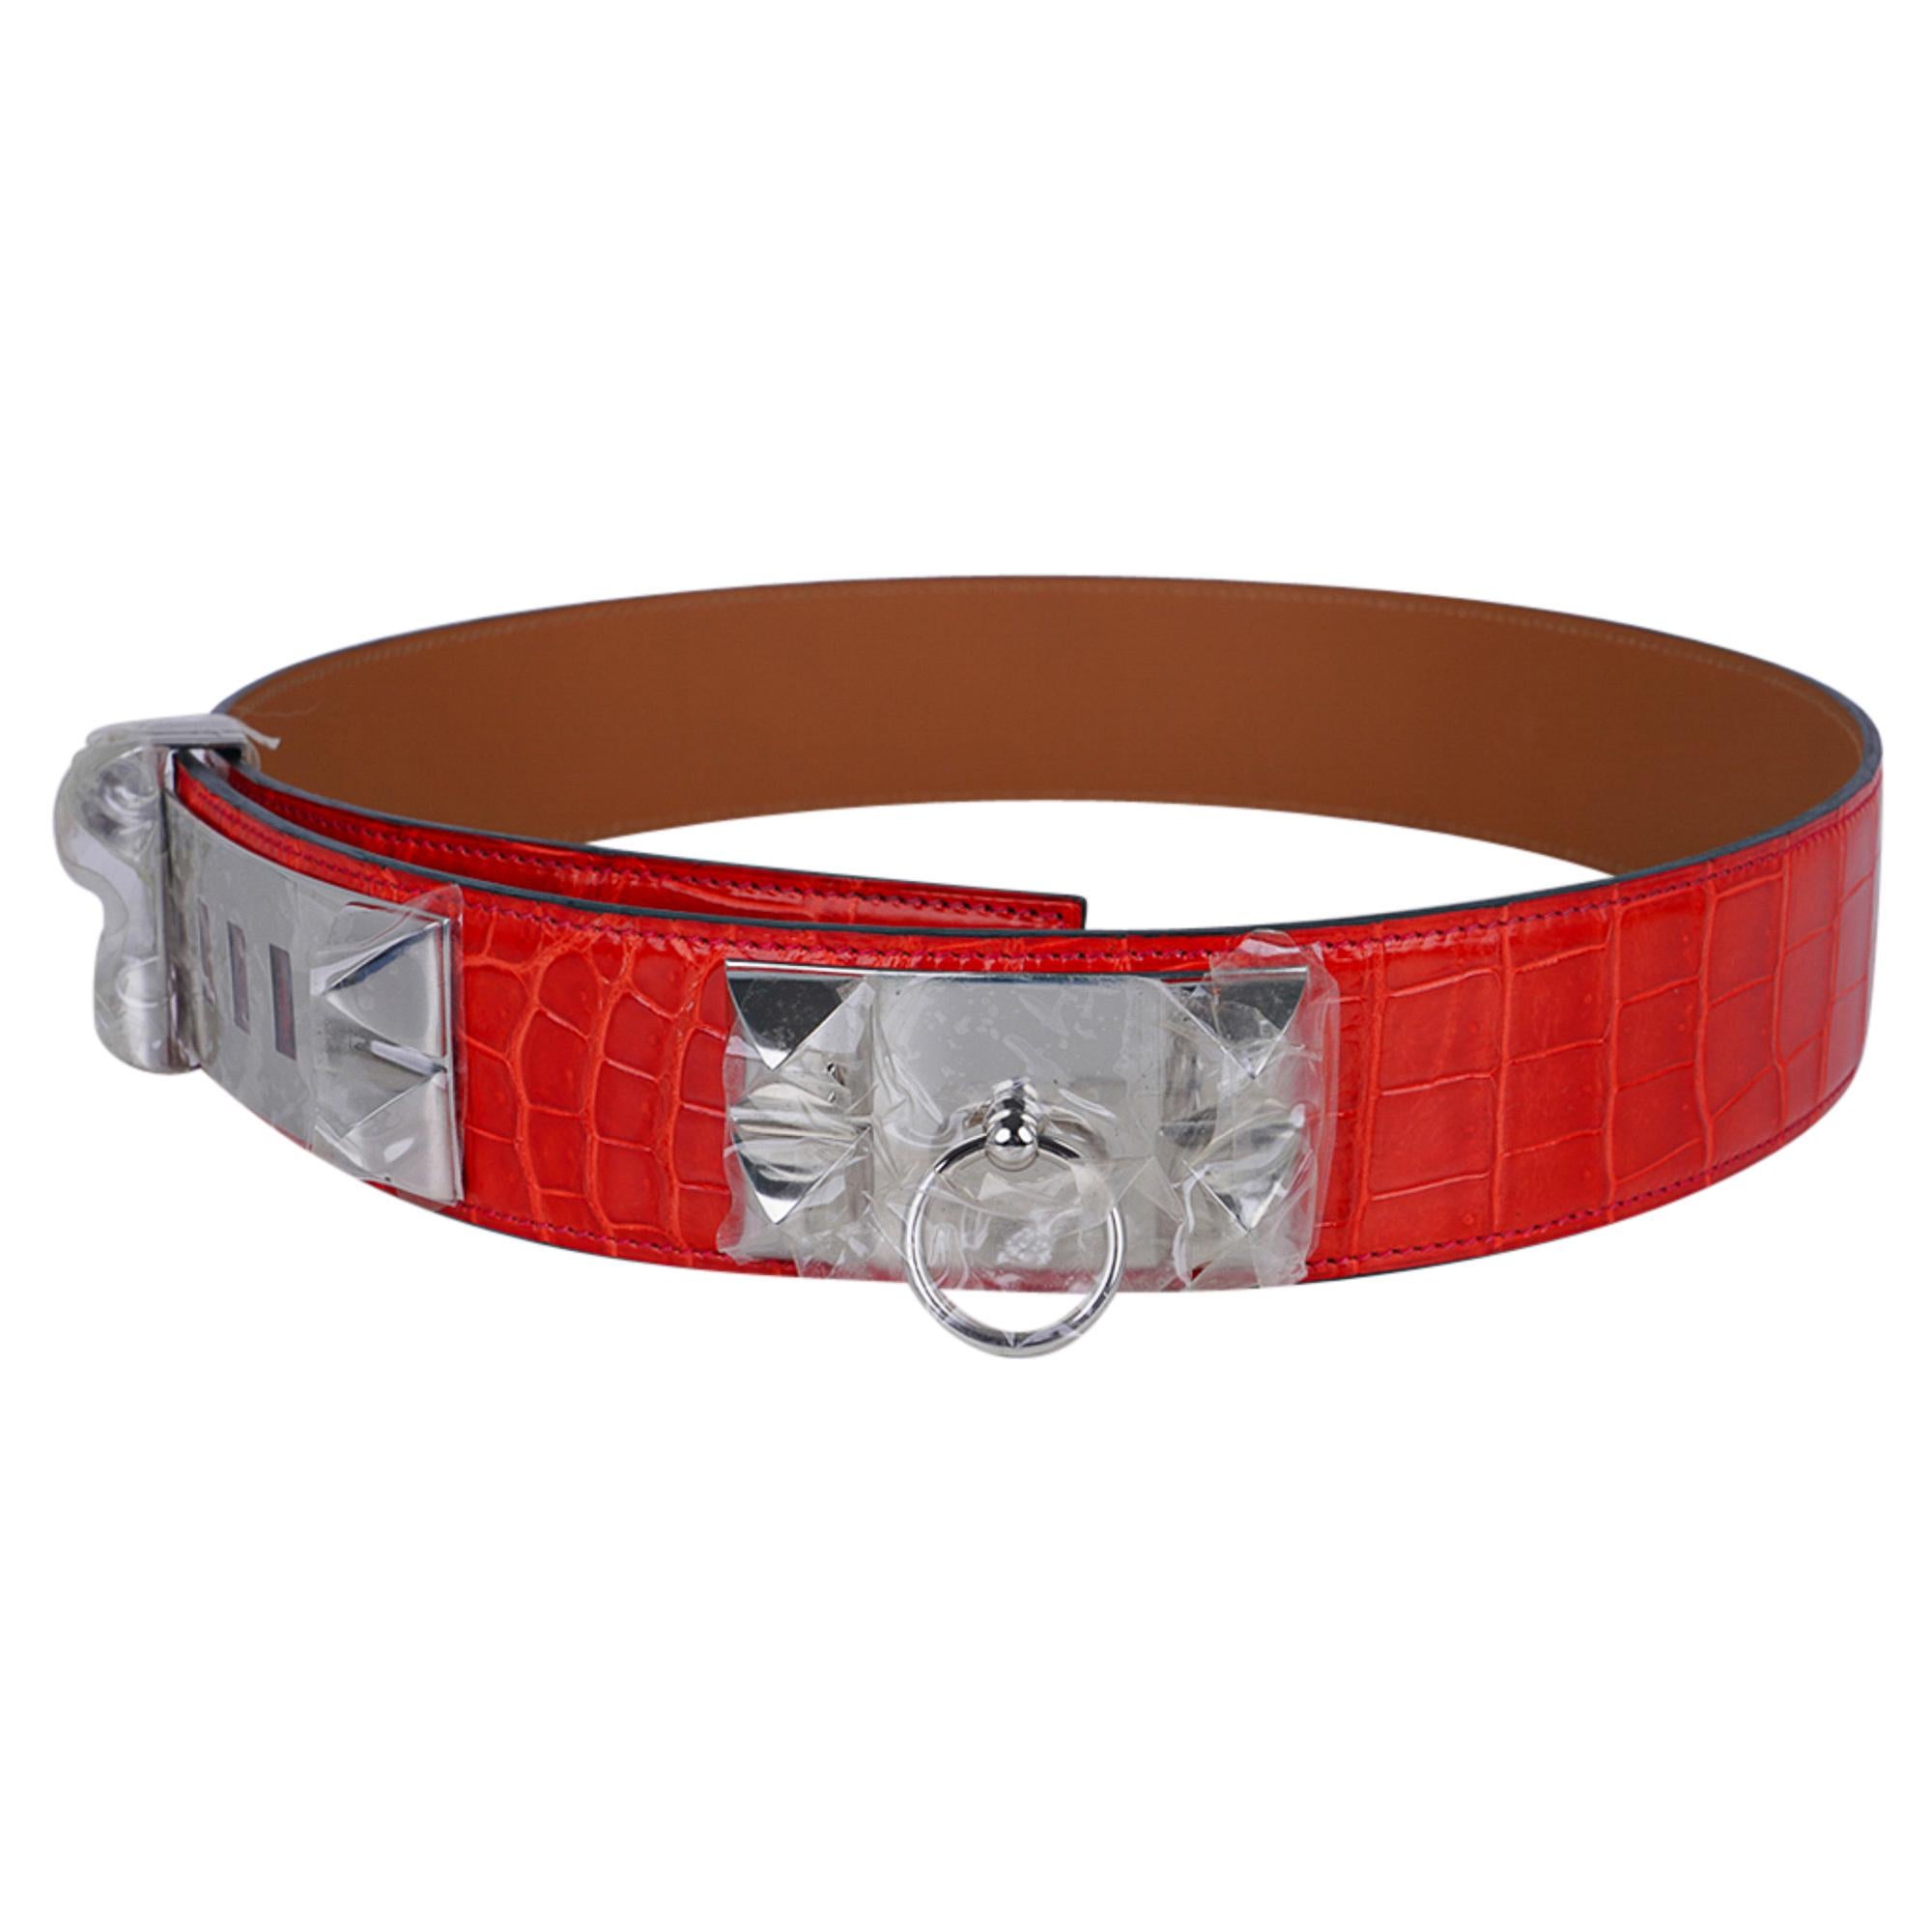 Mightychic offers an Hermes Collier de Chien CDC belt featured in Geranium Porosus Crocodile.
Crisp with Palladium hardware.
The iconic Collier de Chien belt has been retired, and is now making a comeback.
HERMES PARIS MADE IN FRANCE is stamped on